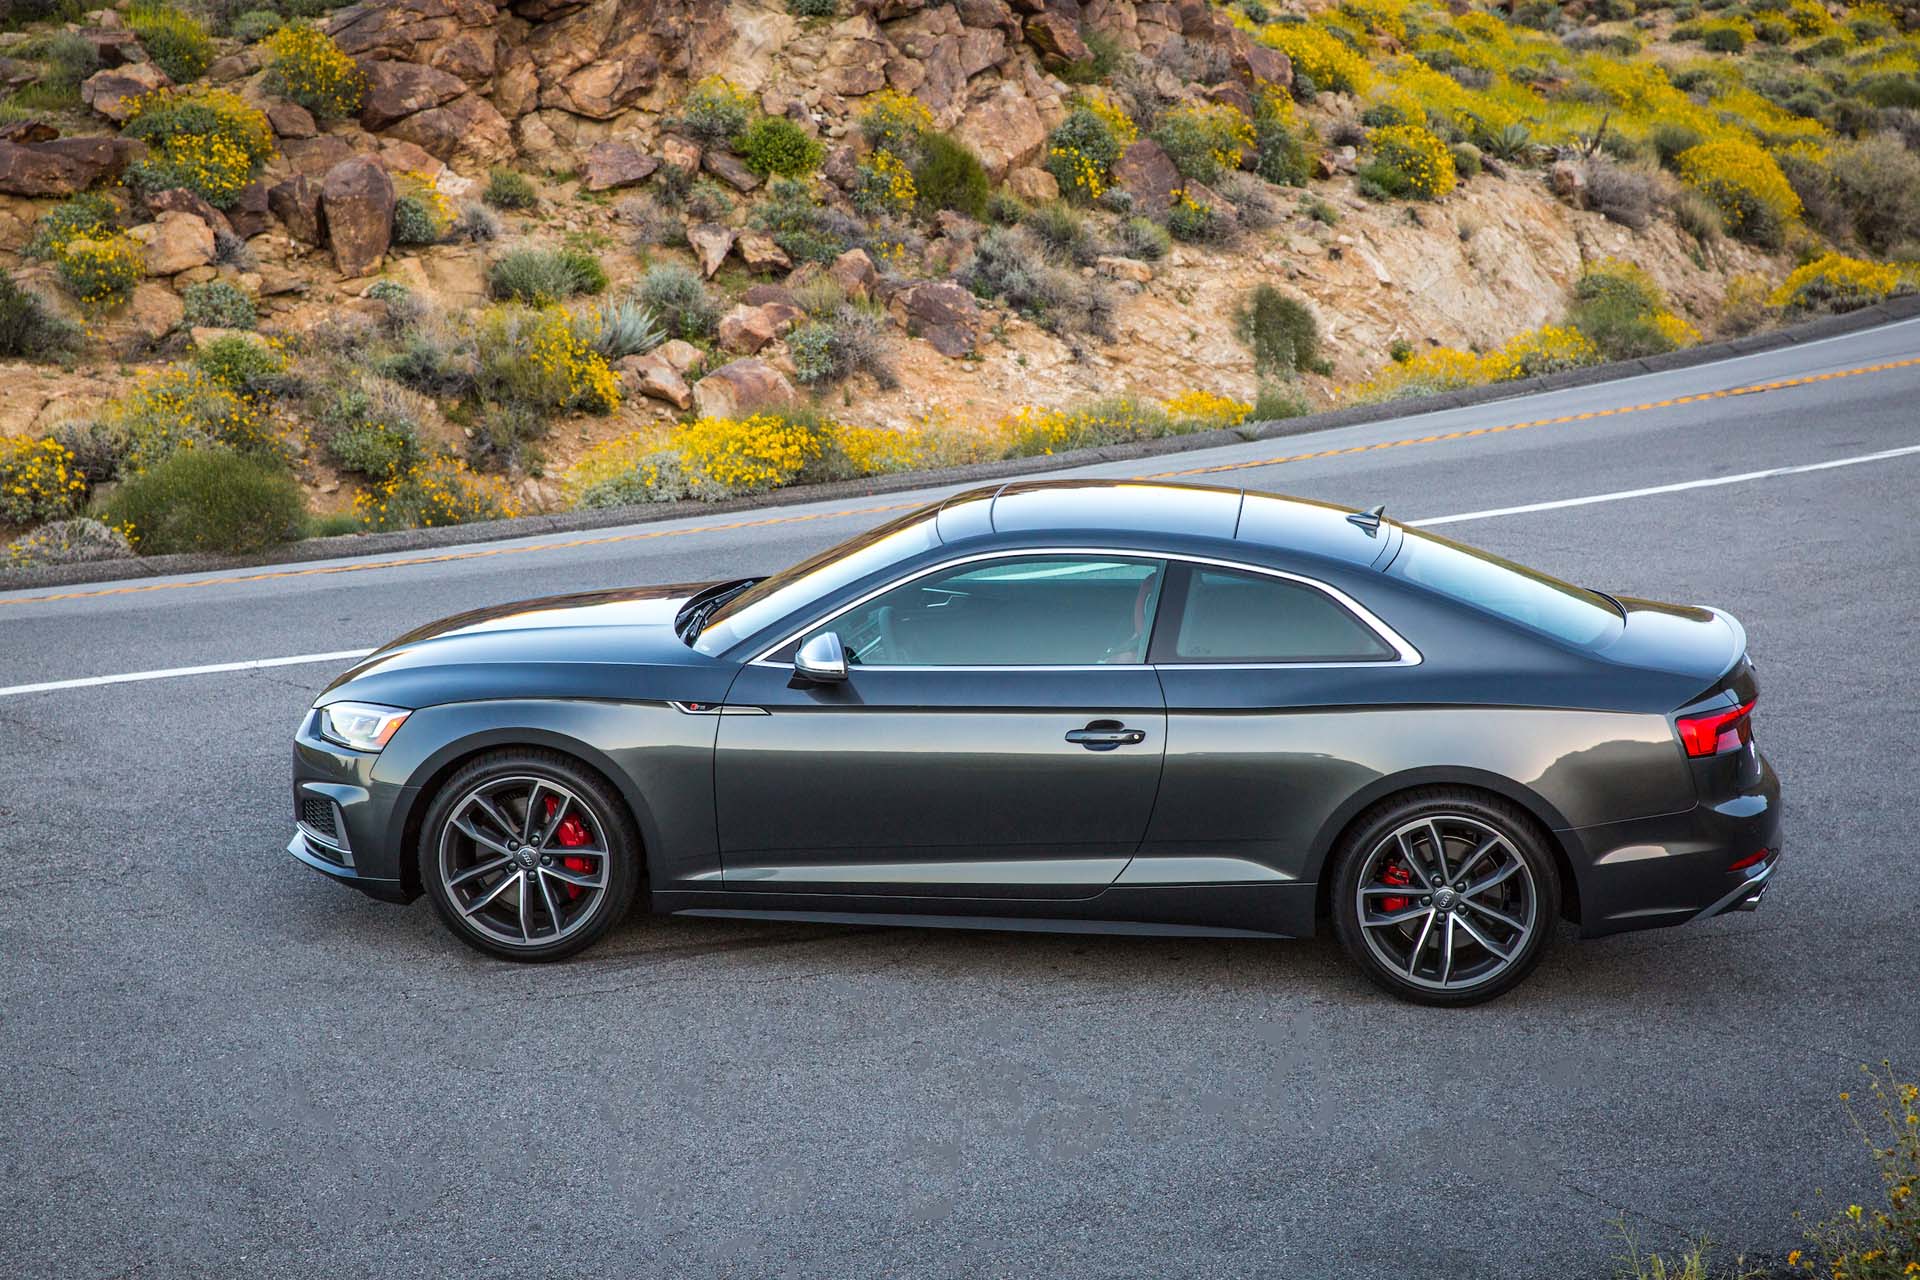 2018 Audi S4/S5 video review: making our own music at Coachella